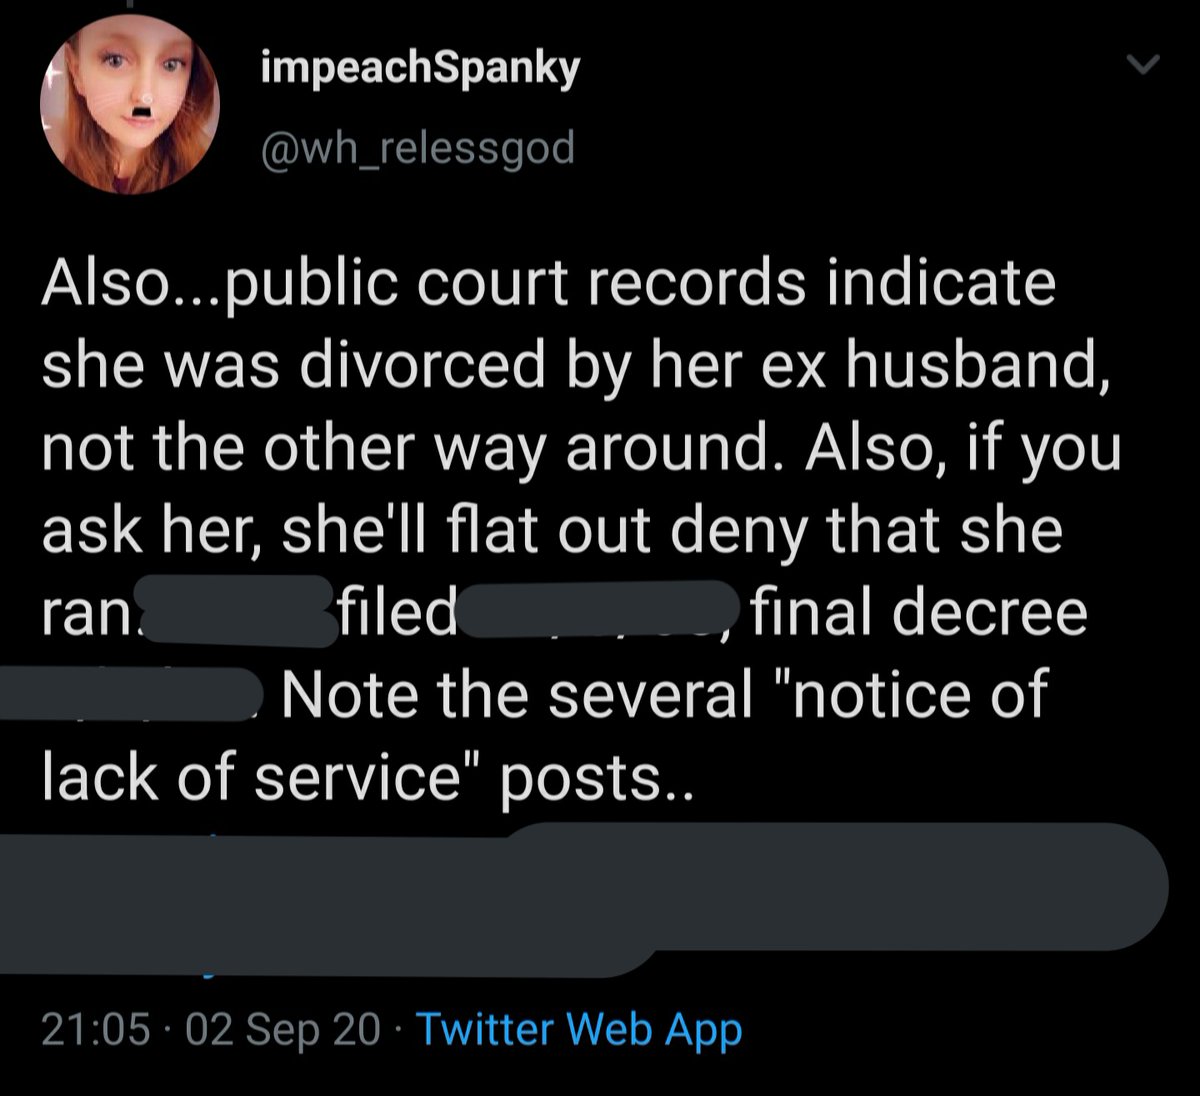 So  @wh_relessgod was started strictly to parody the person they're currently threatening, stealing pictures of her and using them as their own profile pics. This person even paid for court records on their victim in order to attack them online(won't post archived version here):